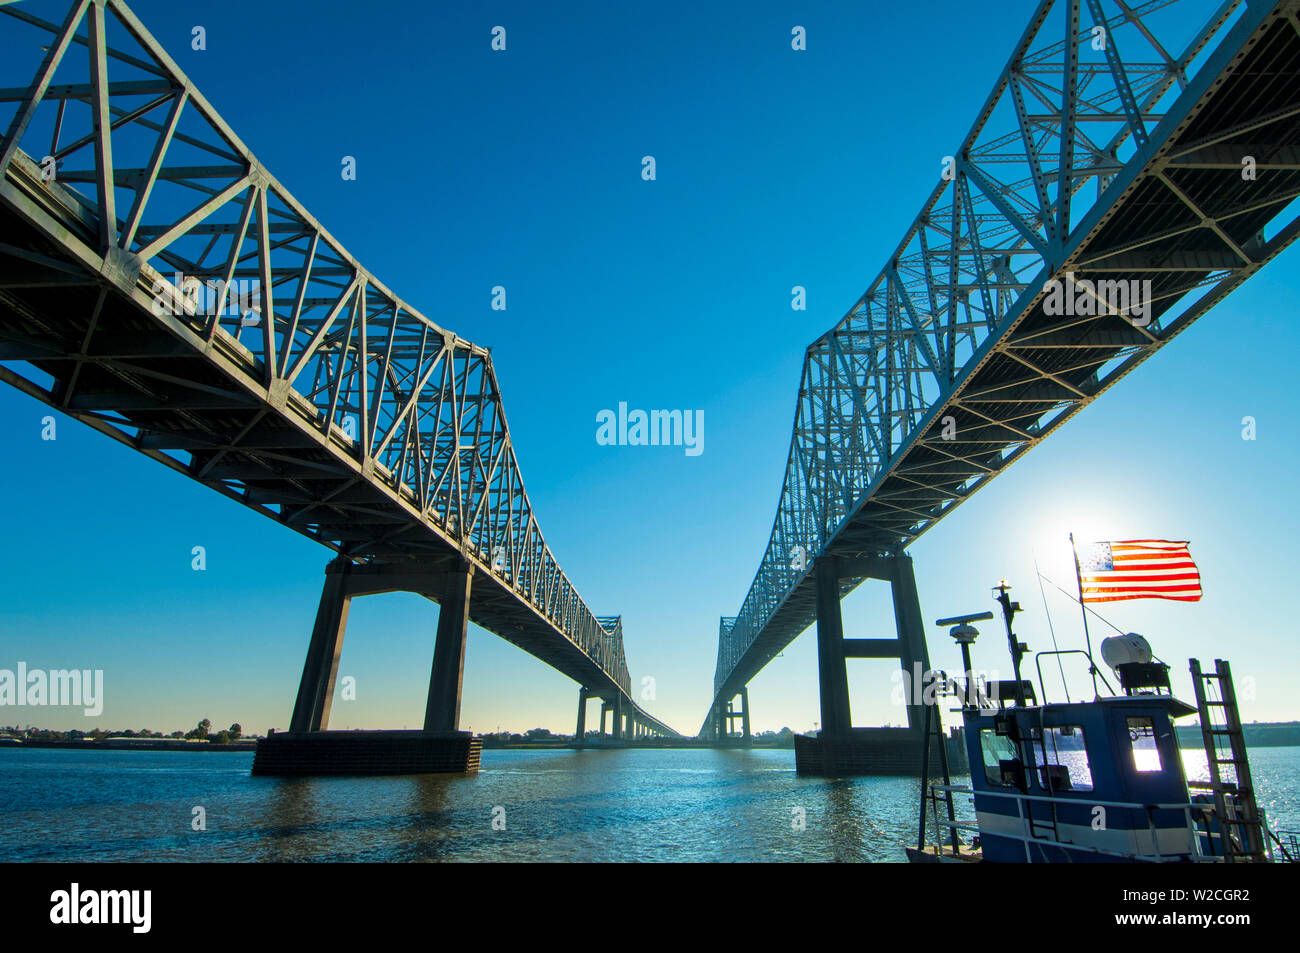 Louisiana, New Orleans, Twin Cantilever Bridges, The Crescent City Connection, Twin Cantilever Bridges, Mississippi River, Tugboat Stock Photo